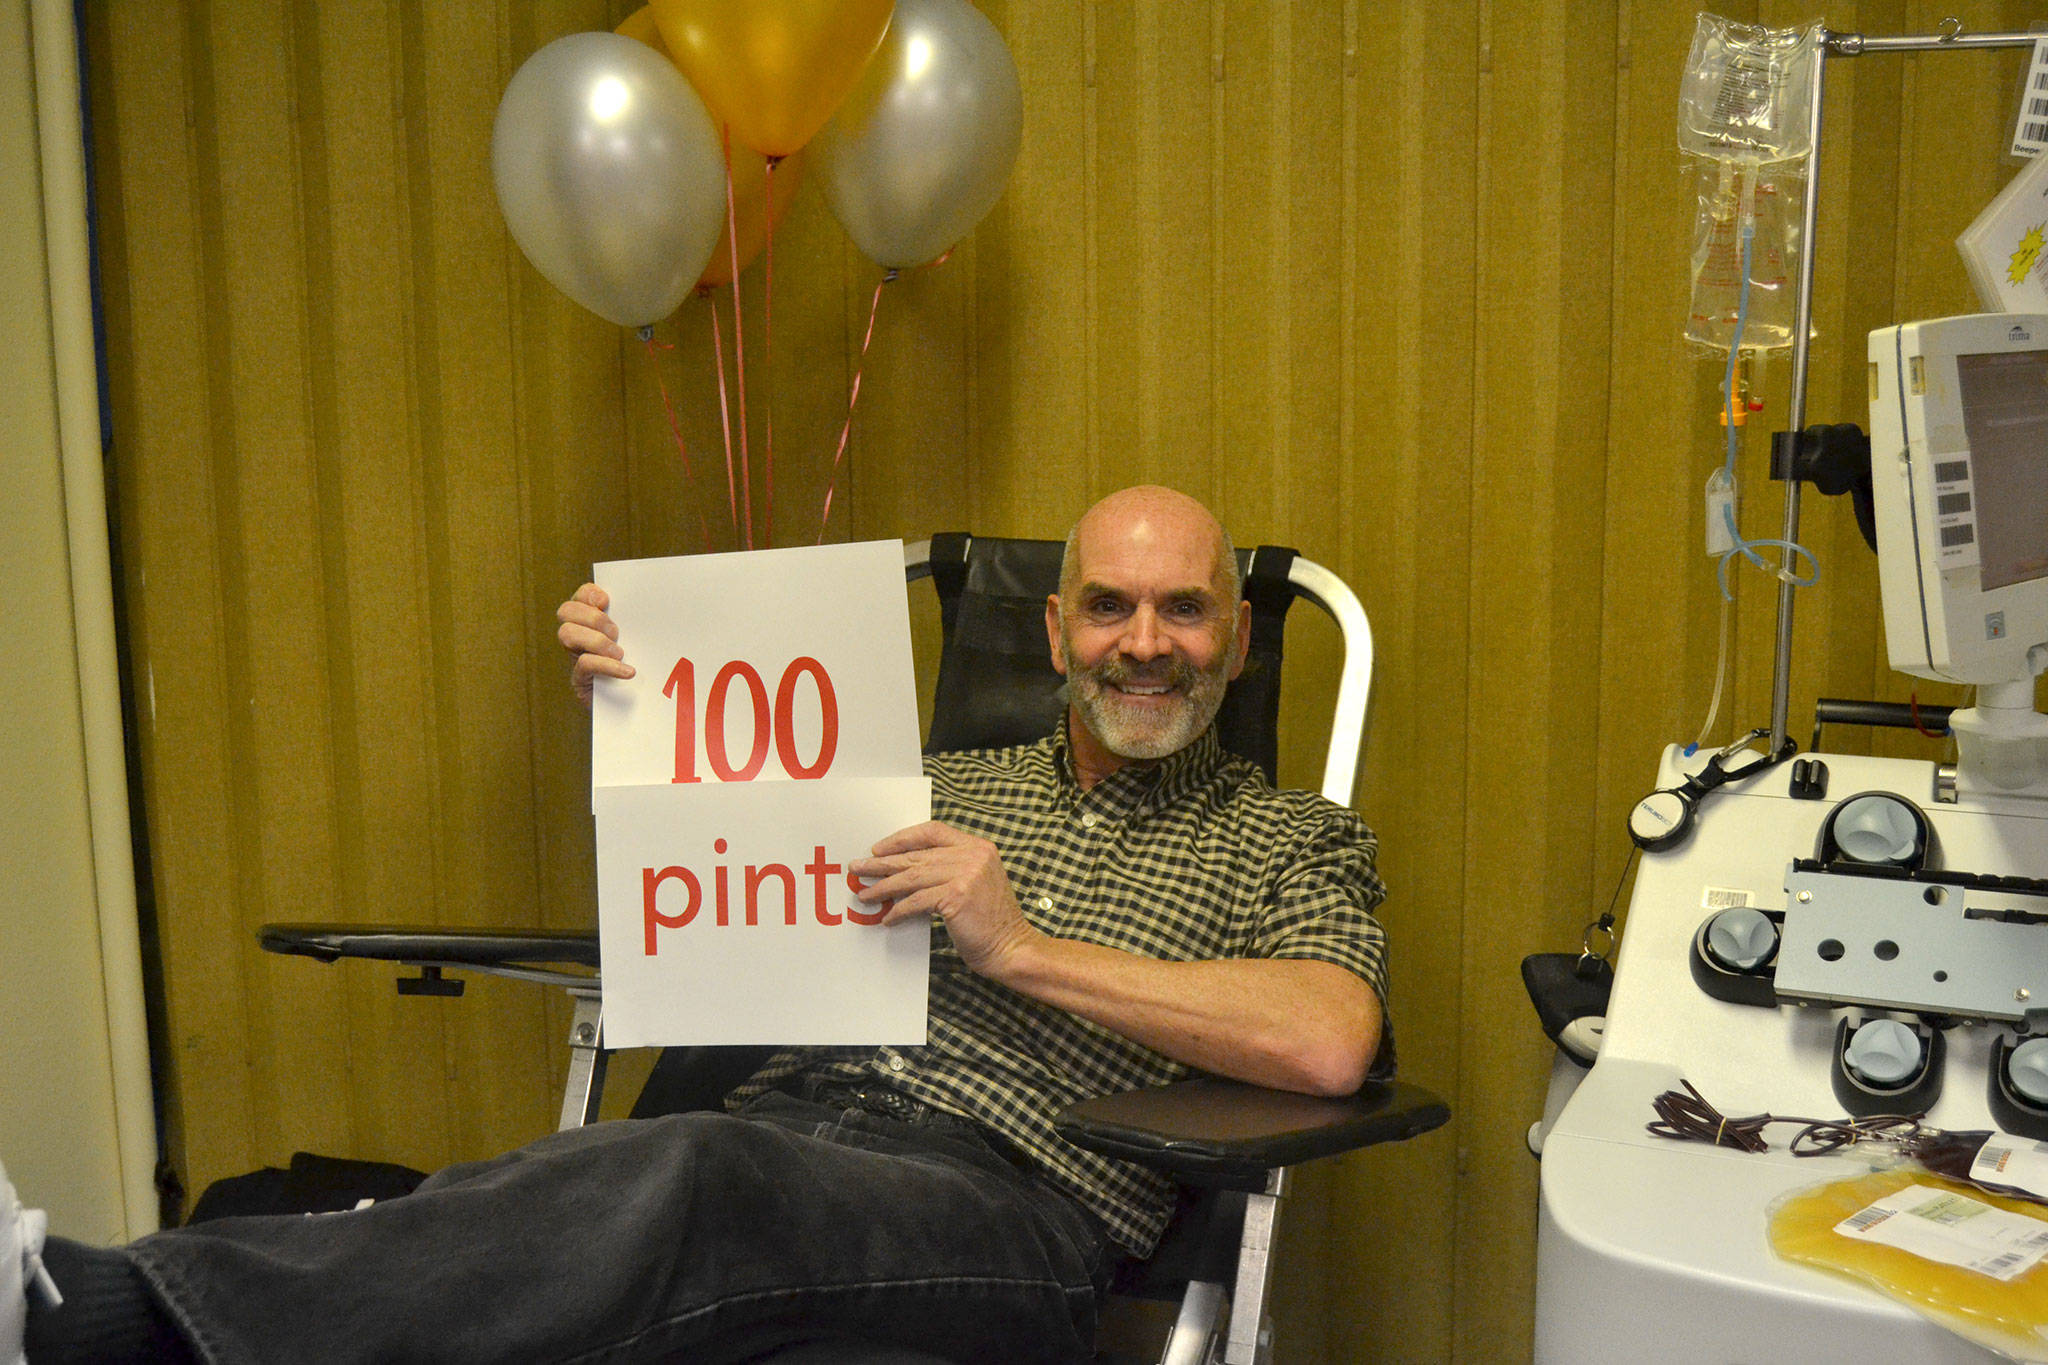 Friend and coworker Gigi Marunde surprises Doug Brundage with balloons and a sign for donating 100 pints of blood and platelets on Nov. 8. Brundage said a coworker being diagnosed with leukemia inspired him to continue giving blood. Sequim Gazette photo by Matthew Nash